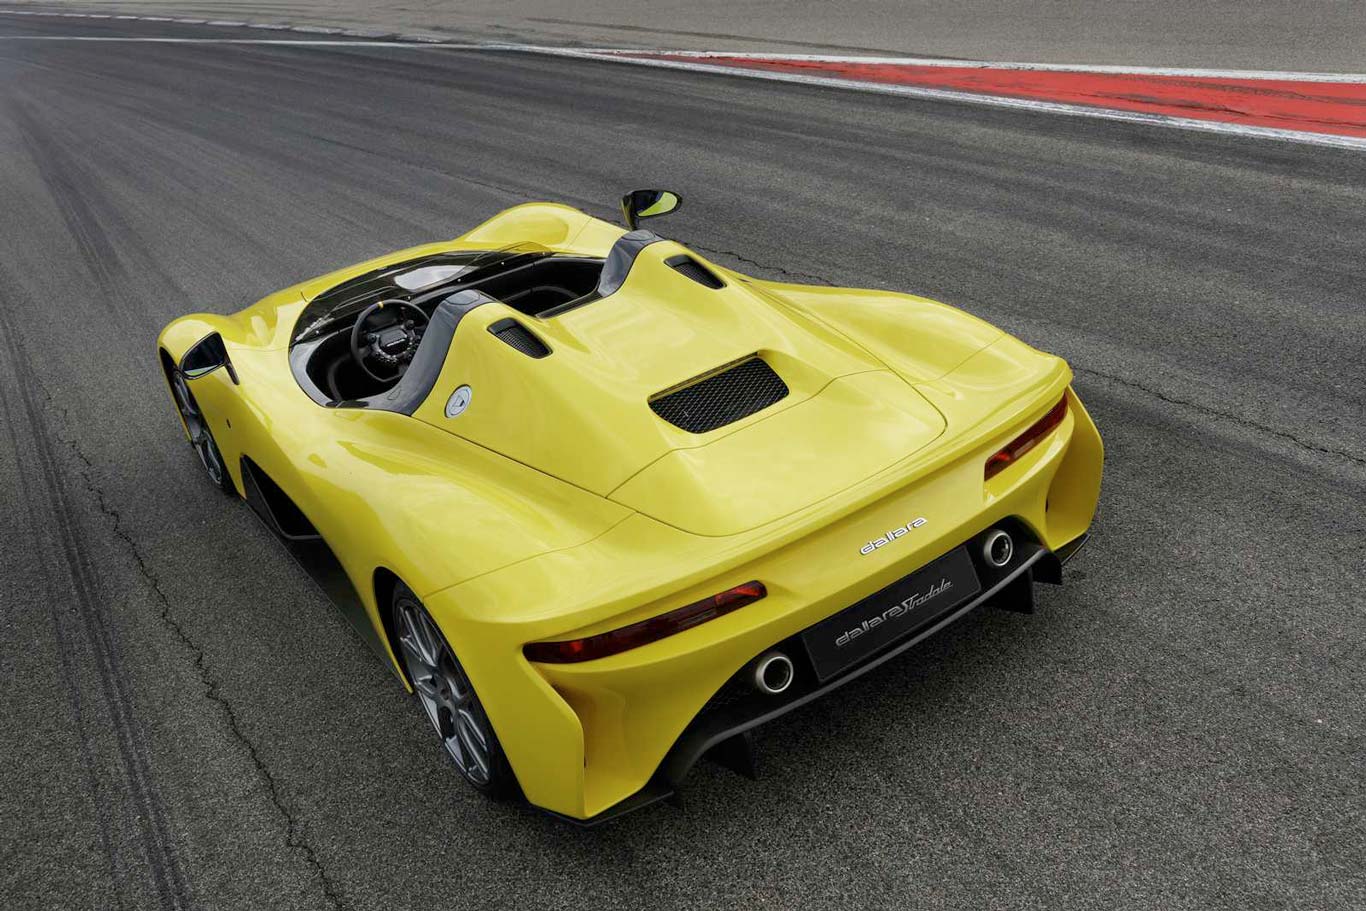 The Dallara Stradale – Review, Performance and Specs